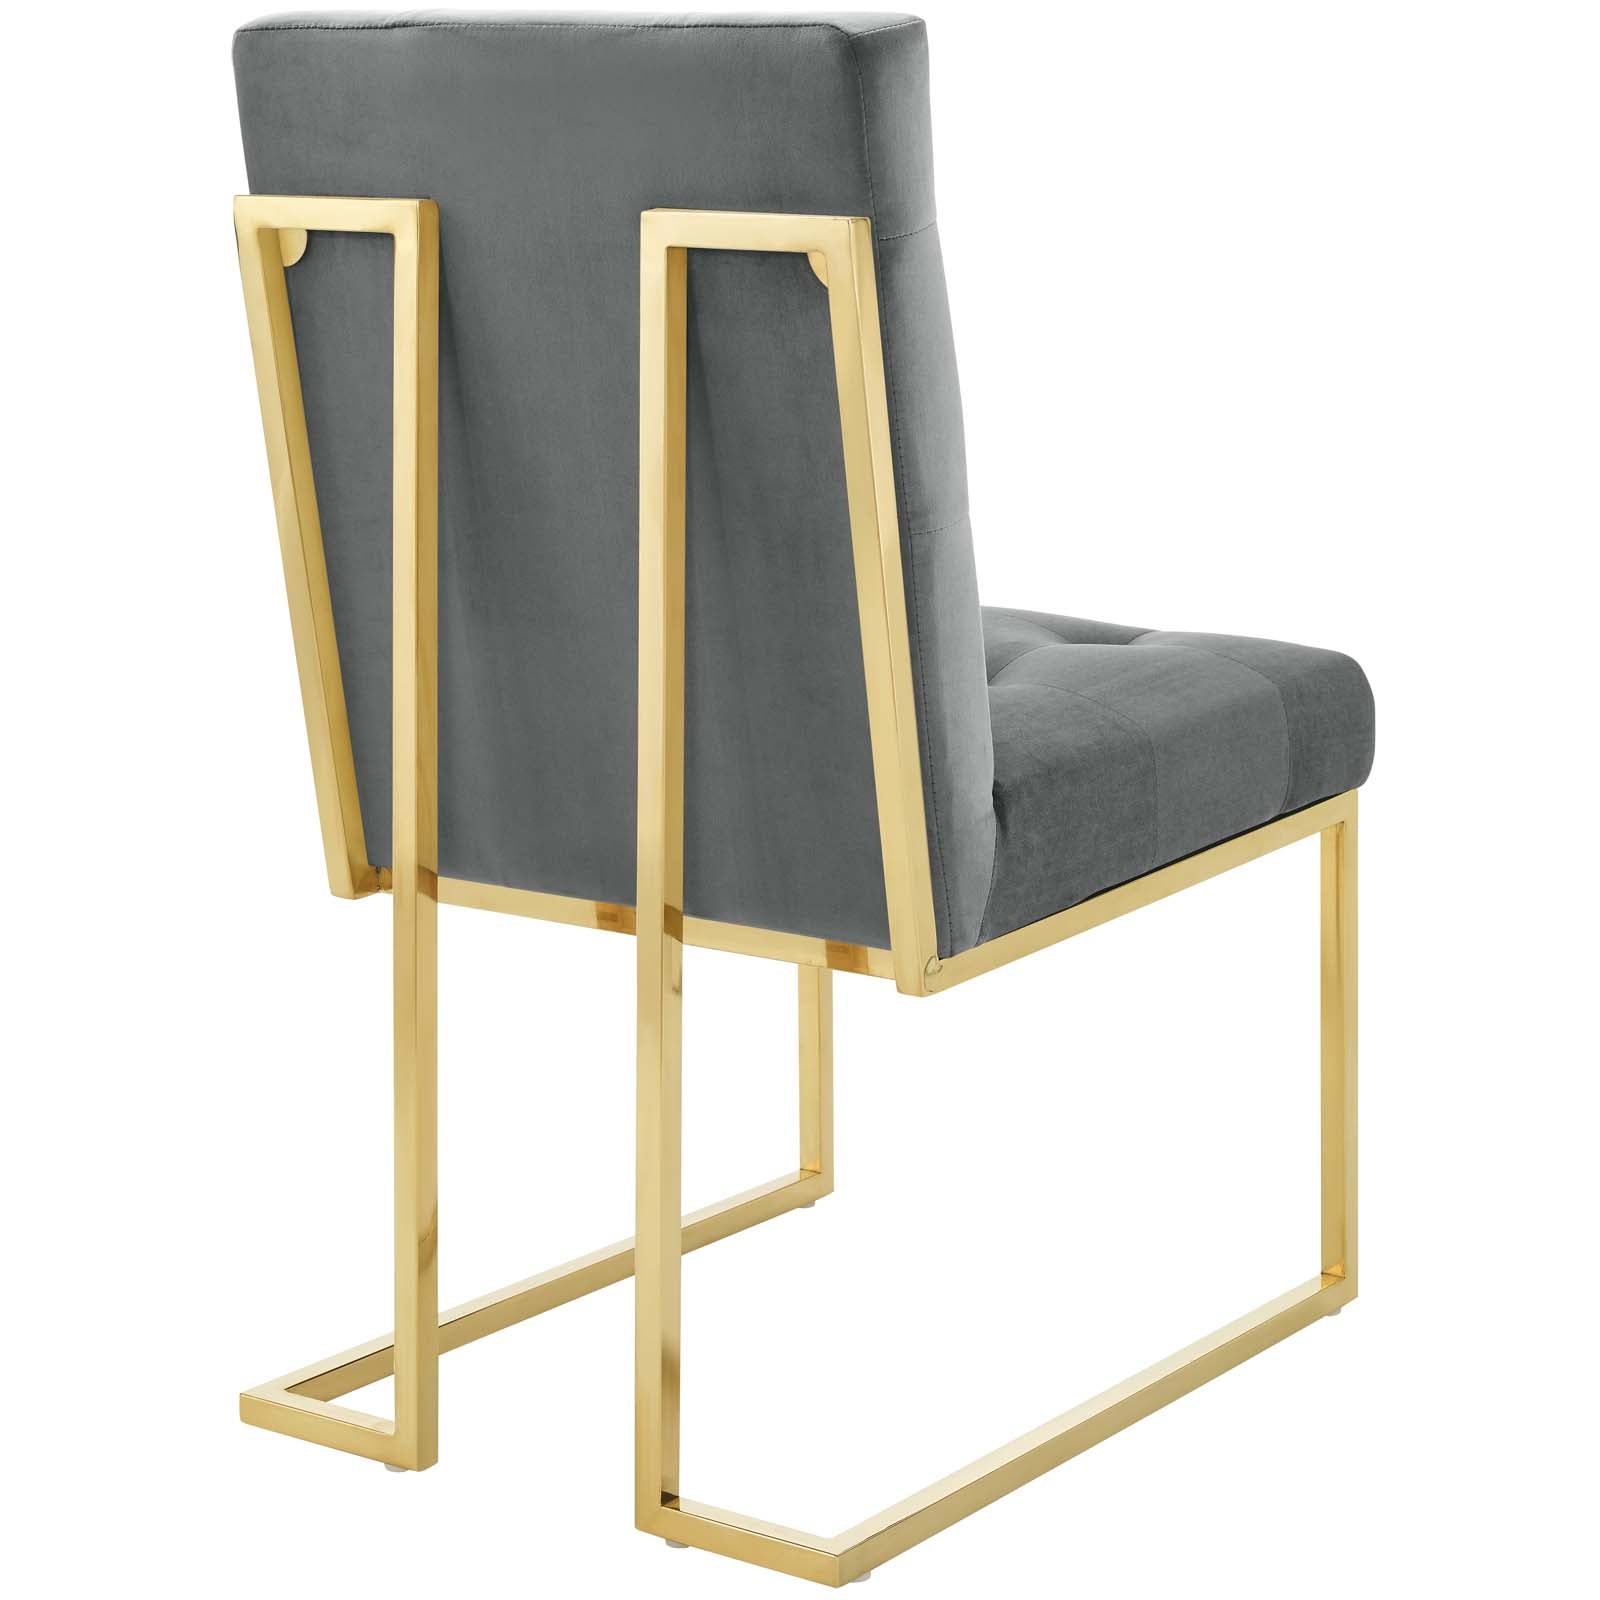 Modway Dining Chairs - Privy Gold Stainless Steel Performance Velvet Dining Chair Set of 2 Gold Charcoal